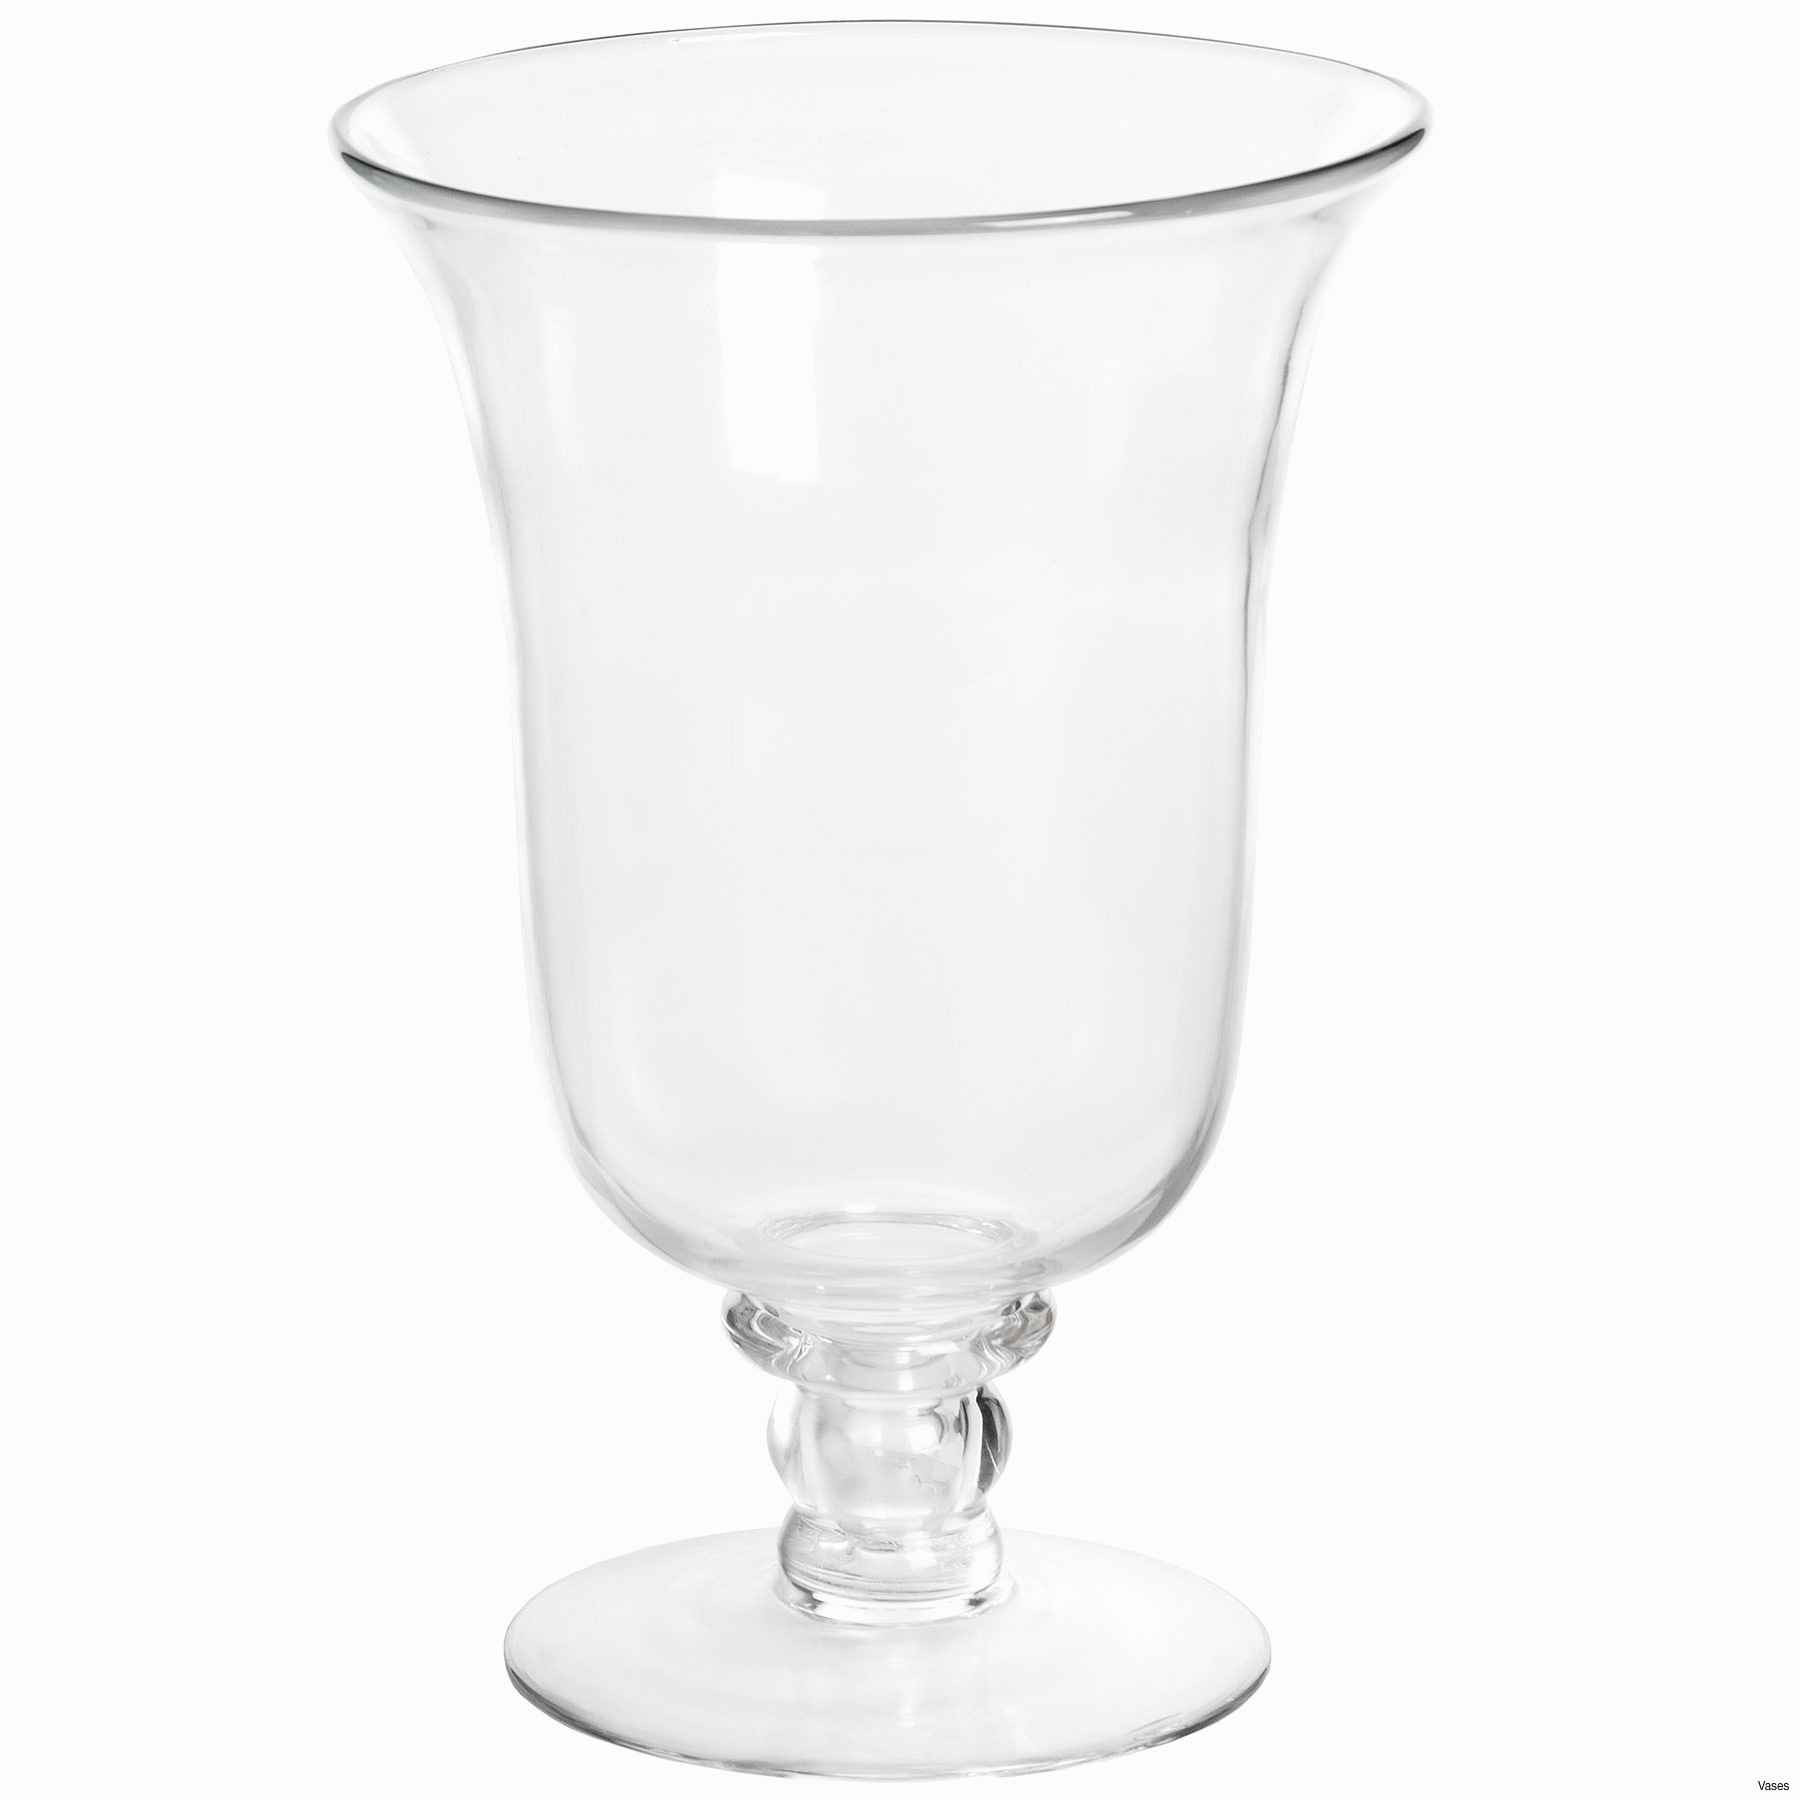 mercury glass cylinder vase of wholesale vases www topsimages com with regard to candle stands wholesale lovely faux crystal candle holders alive vases gold tall jpgi cheap jpg 1800x1800